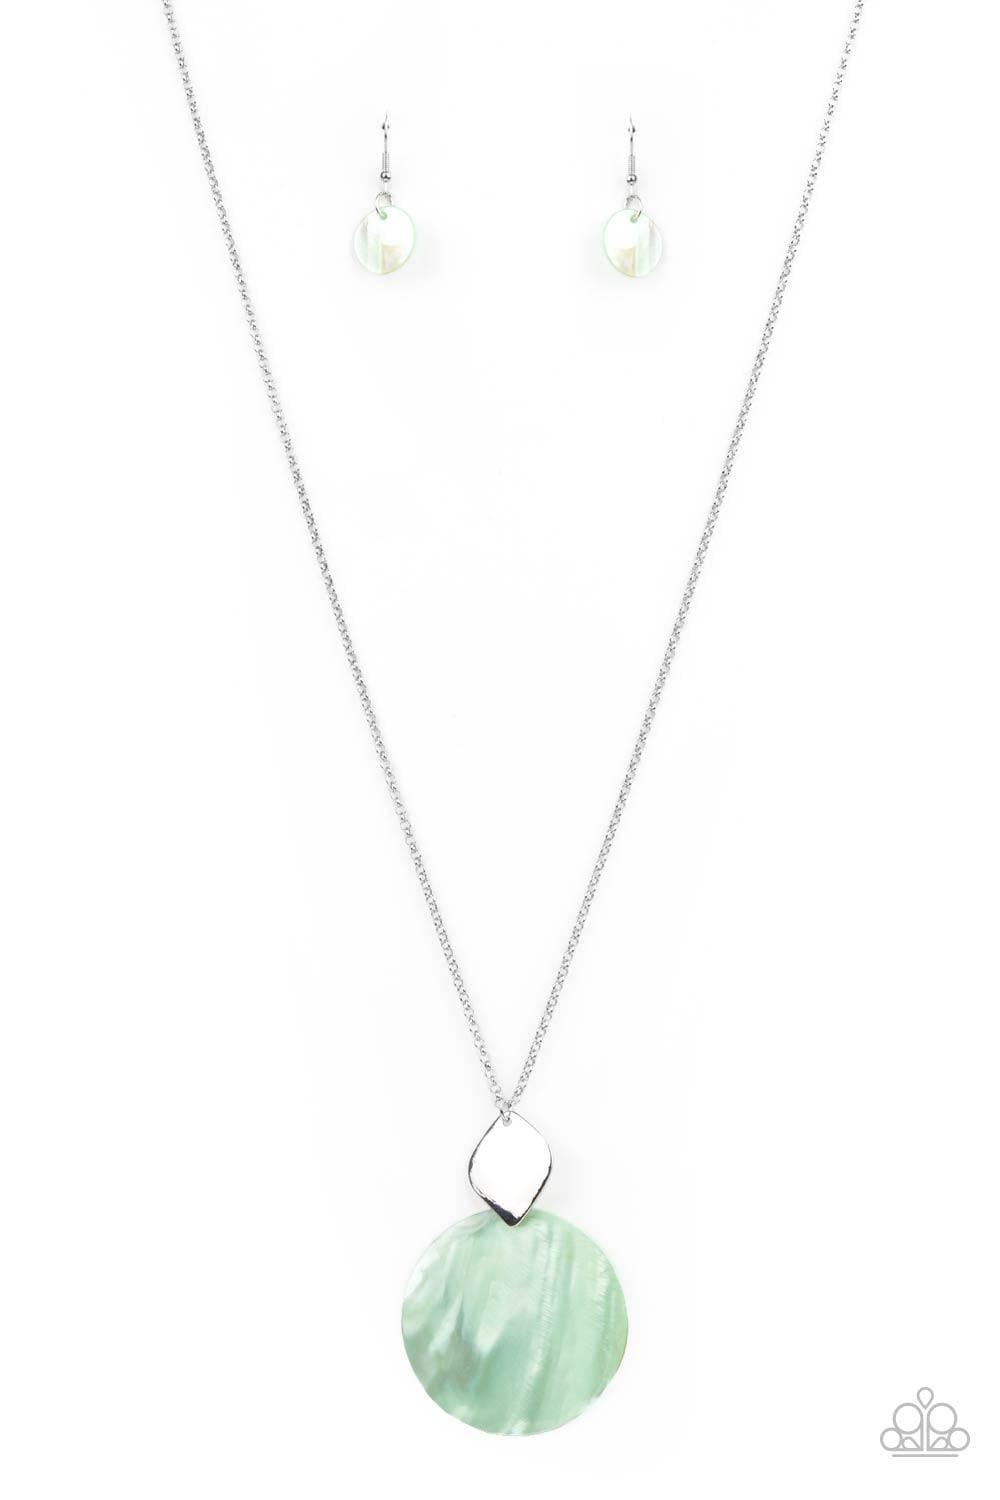 Paparazzi Accessories - Tidal Tease - Green Necklace - Bling by JessieK